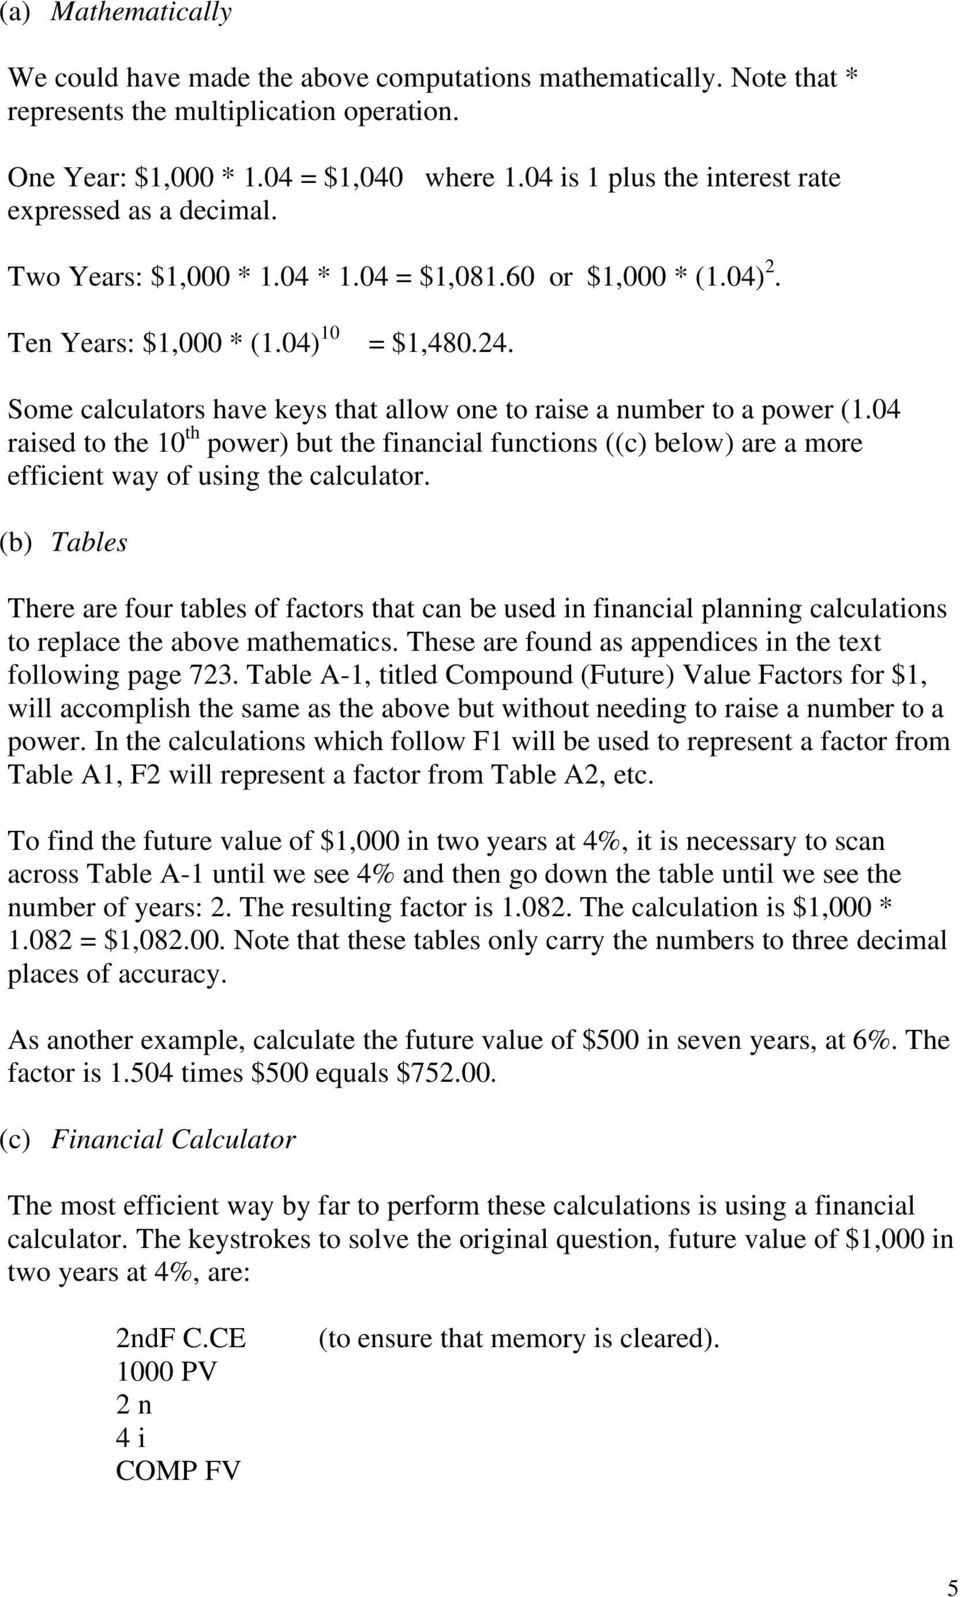 Some calculators have keys that allow one to raise a number to a power (1.04 raised to the 10 th power) but the financial functions ((c) below) are a more efficient way of using the calculator.